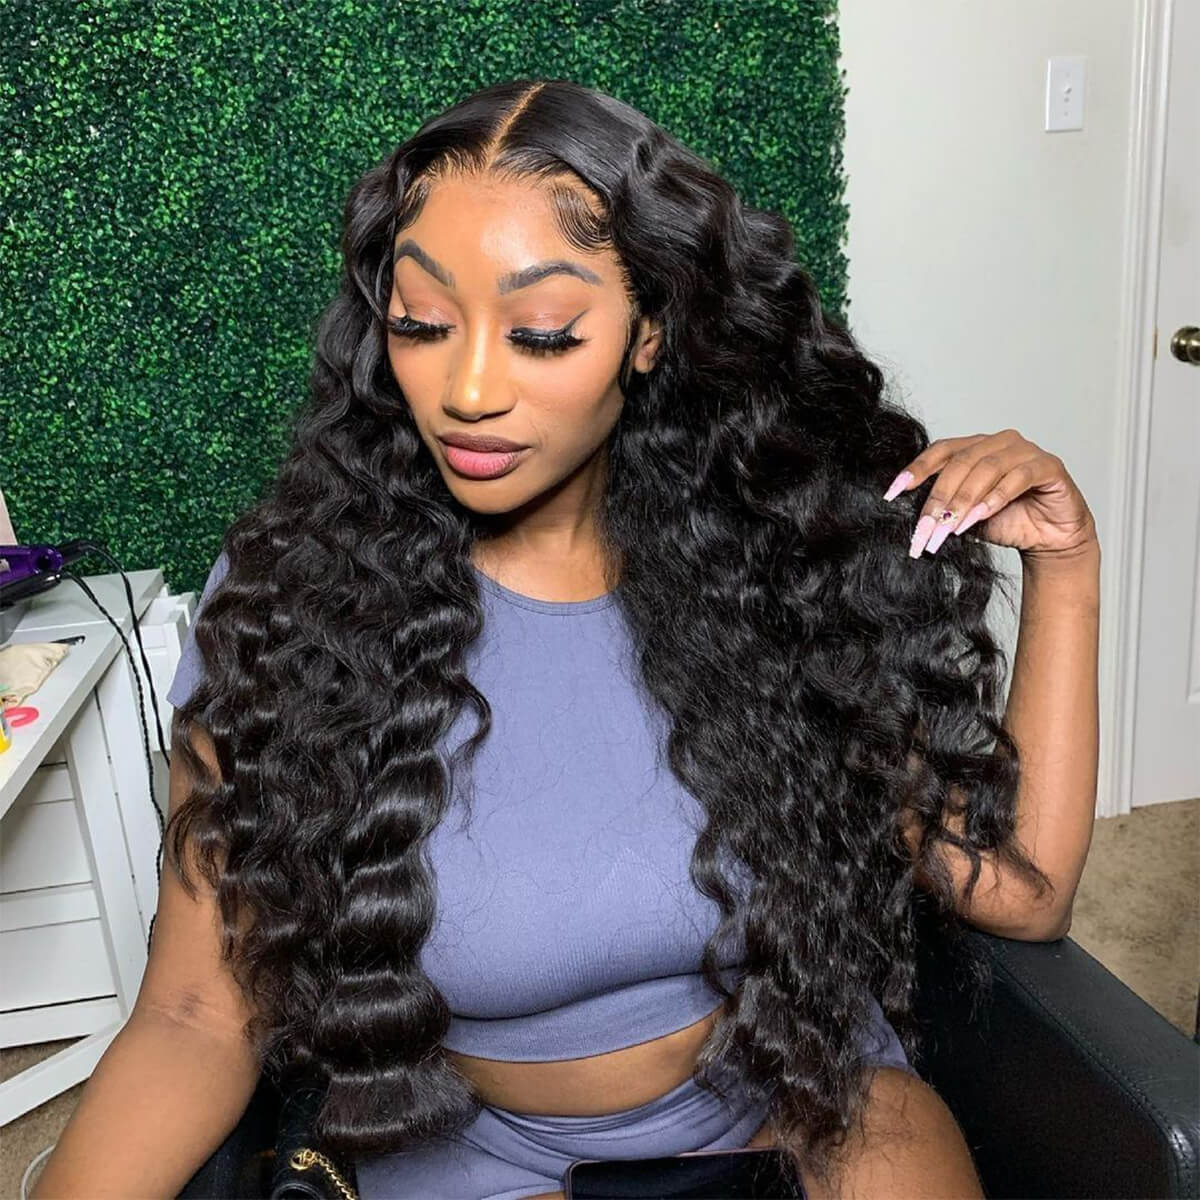 Human Hair Wigs for Women Loose Deep Wave 6*6 Deep Parting Lace